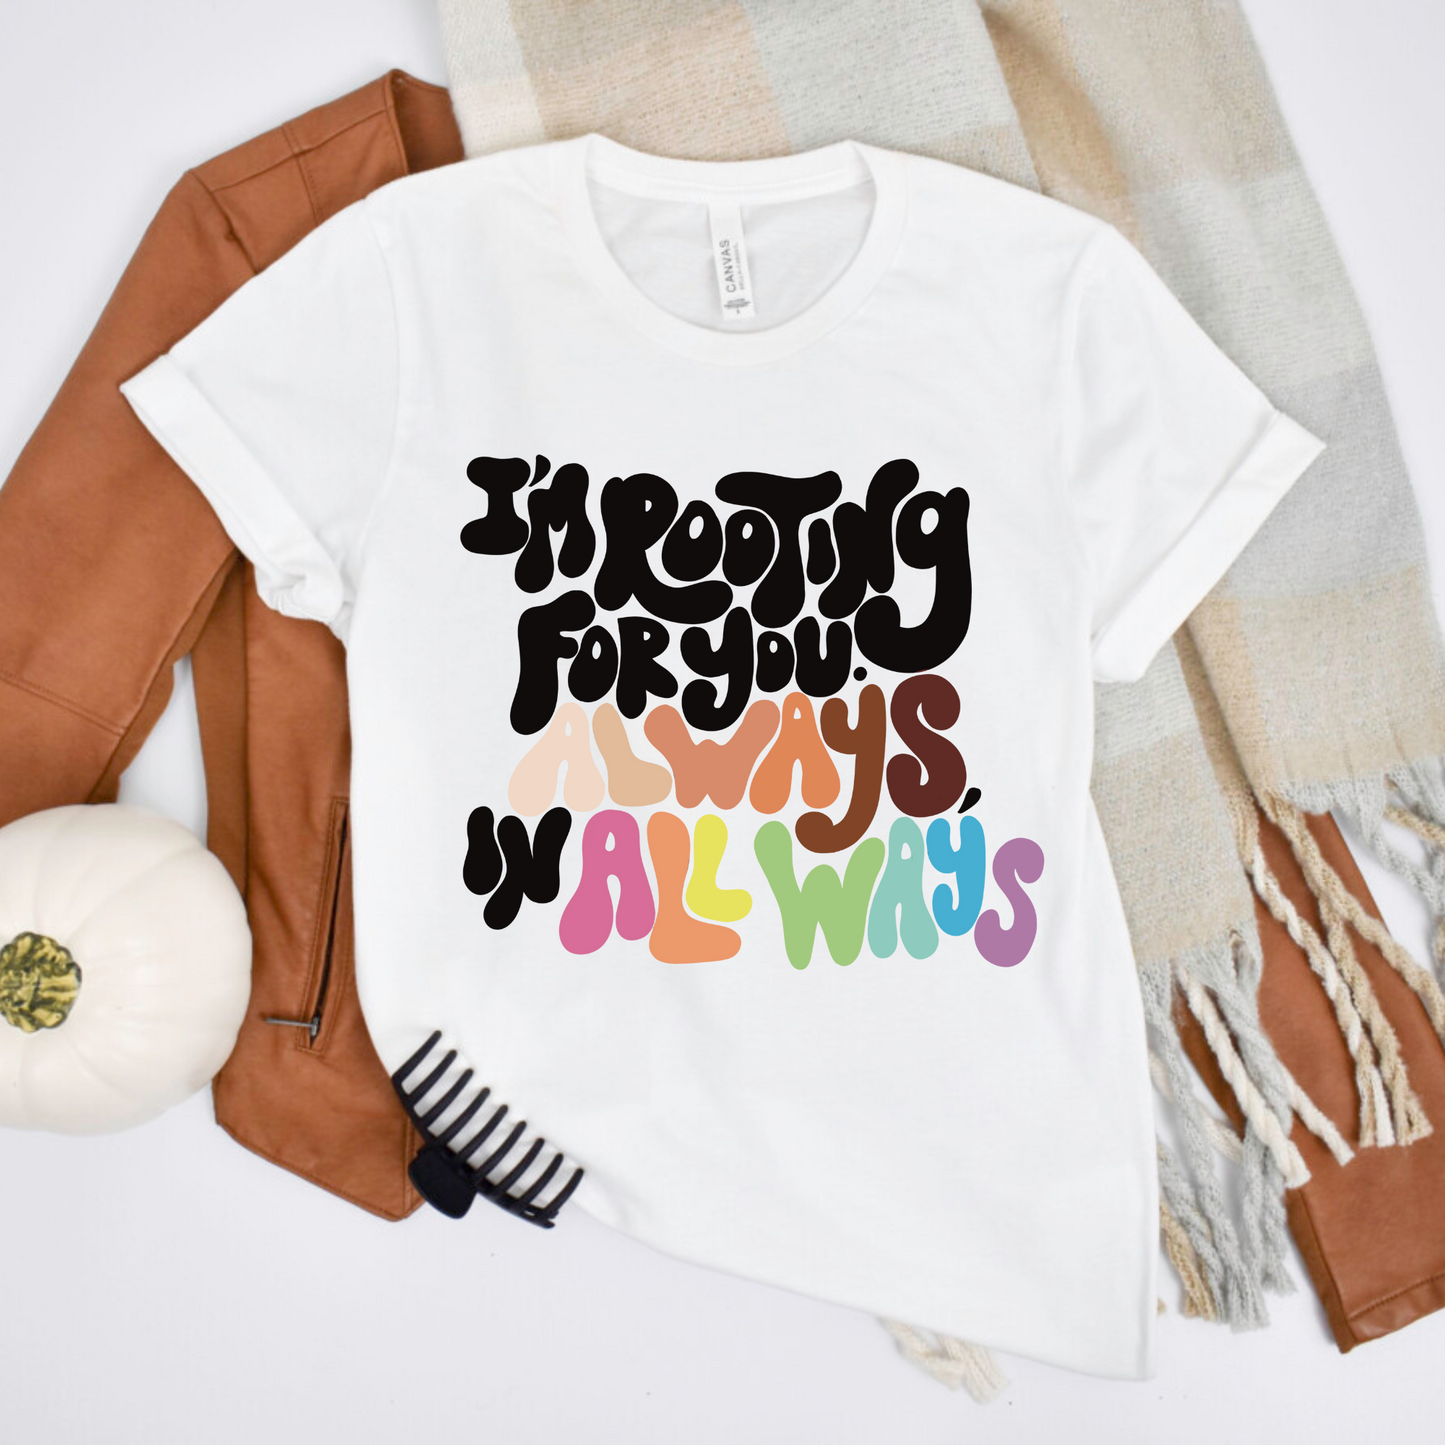 I'm Rooting for You. Always, in All Ways Diversity Shirt